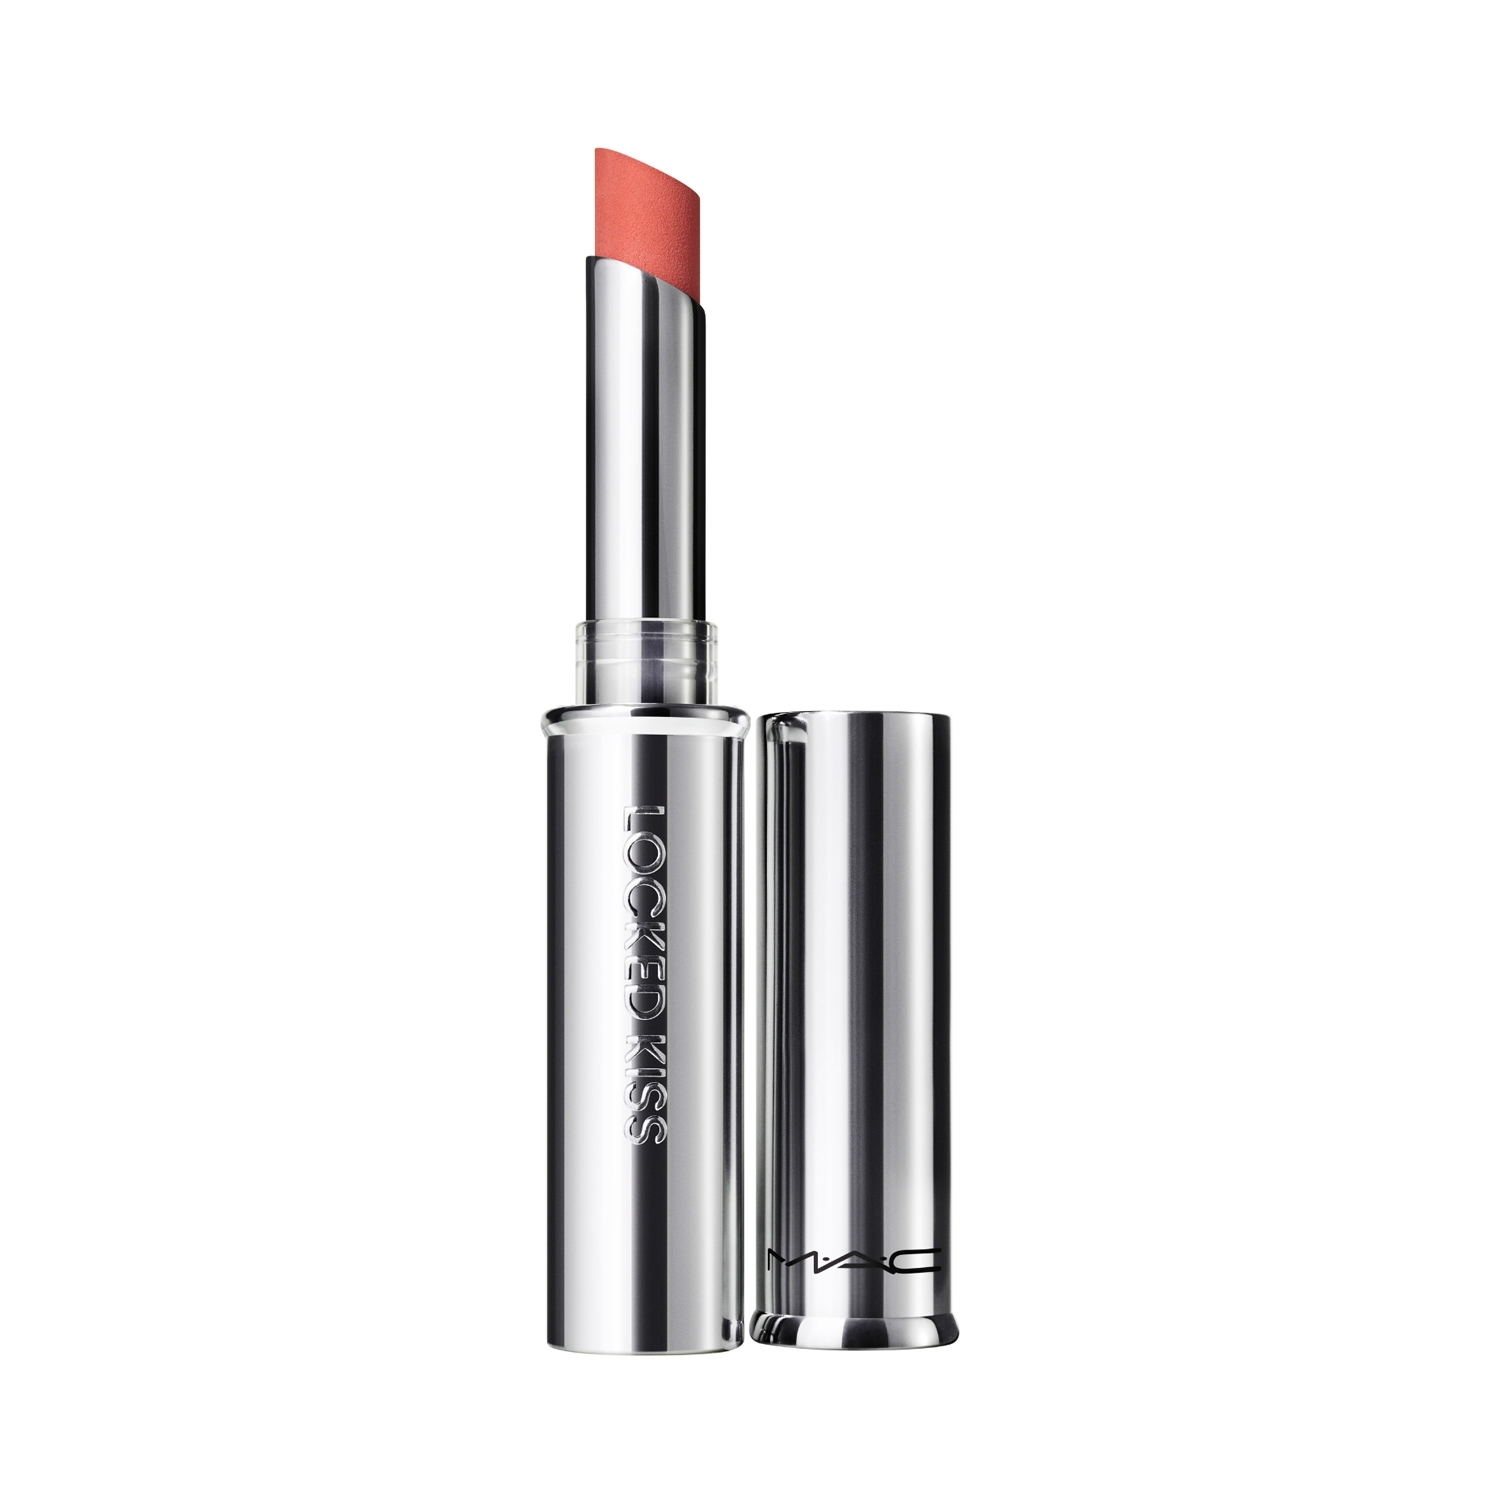 M.A.C | M.A.C Locked Kiss 24HR Lipstick - Mull It Over & Over (1.8g)